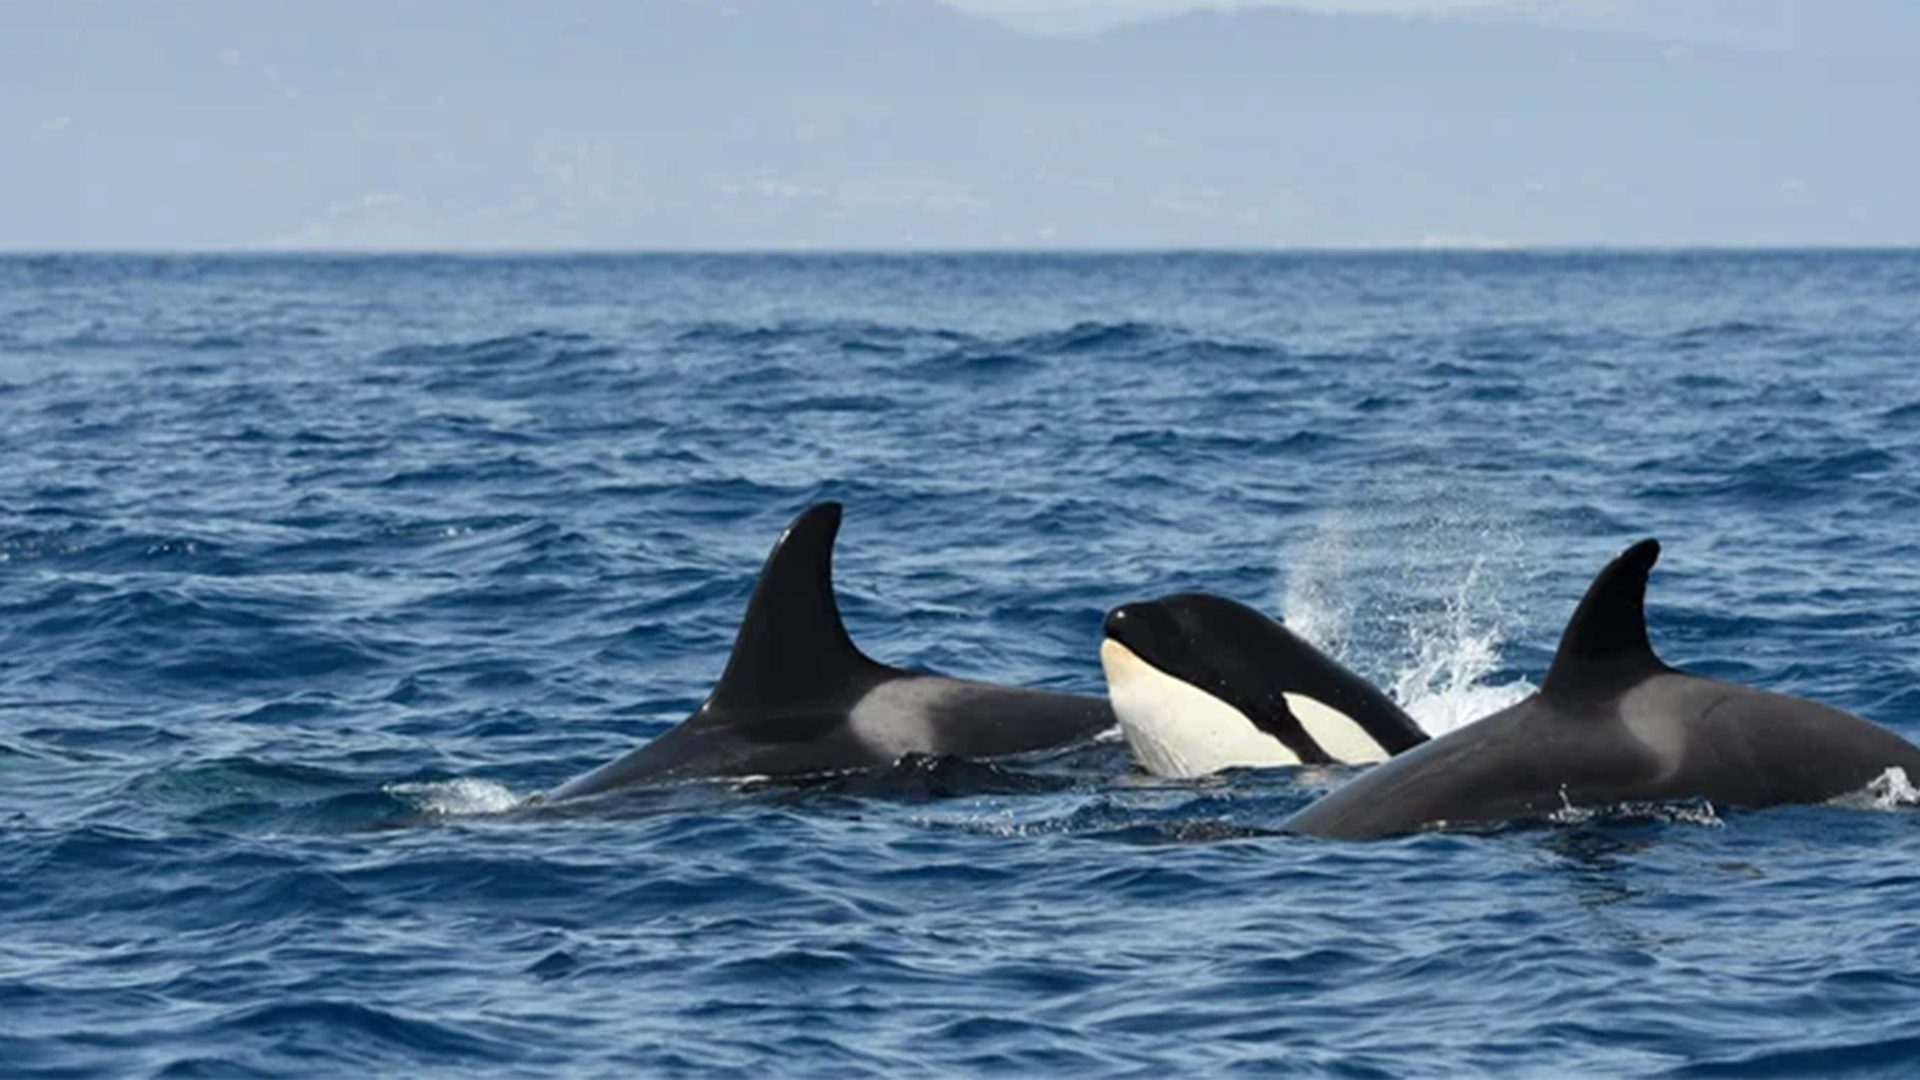 A group of three orcas swimming in the Strait of Gibraltar